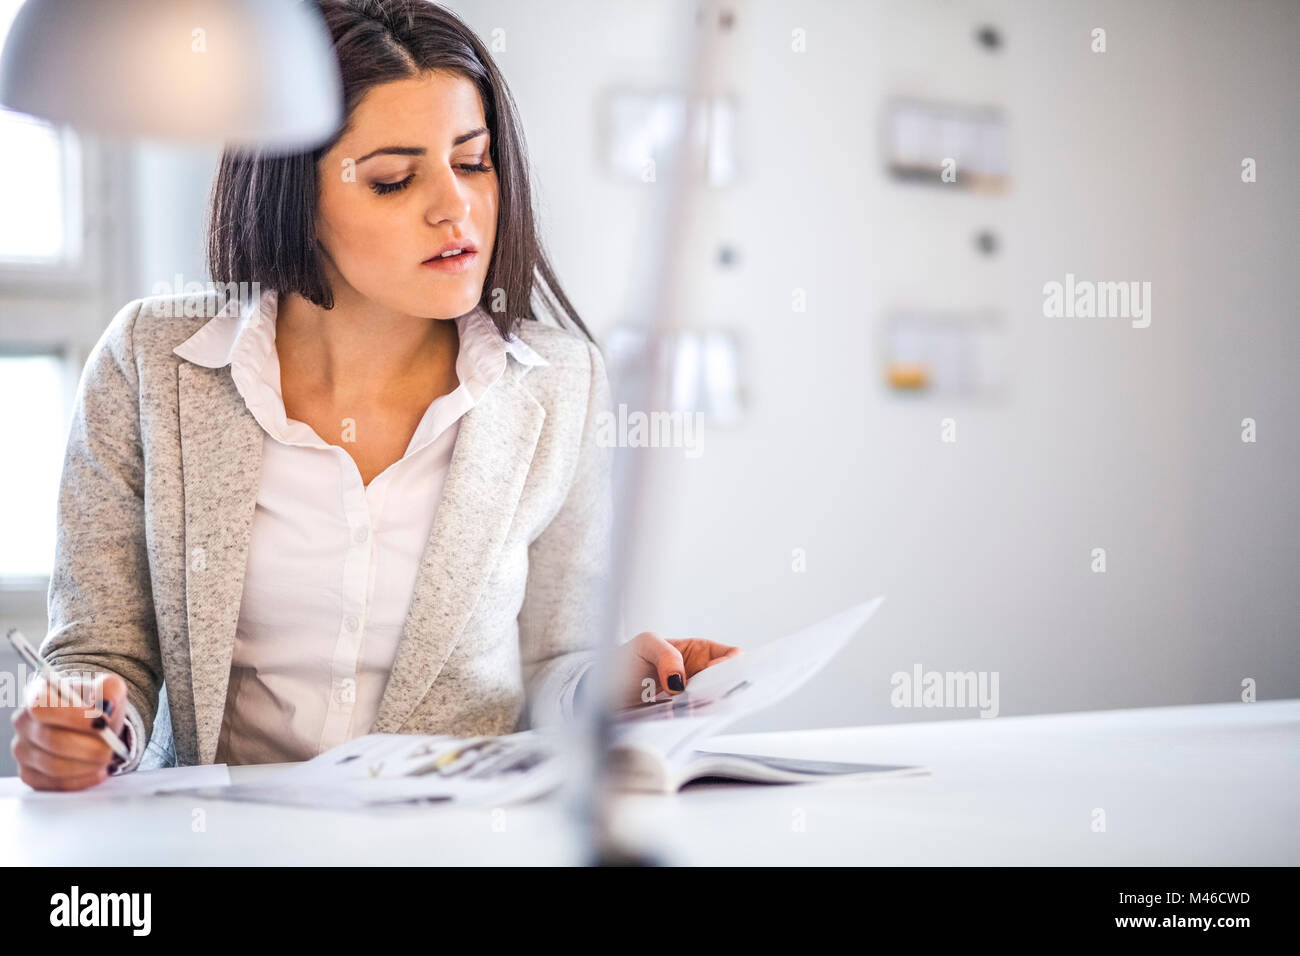 Businesswoman reading brochure while taking notes in office Stock Photo